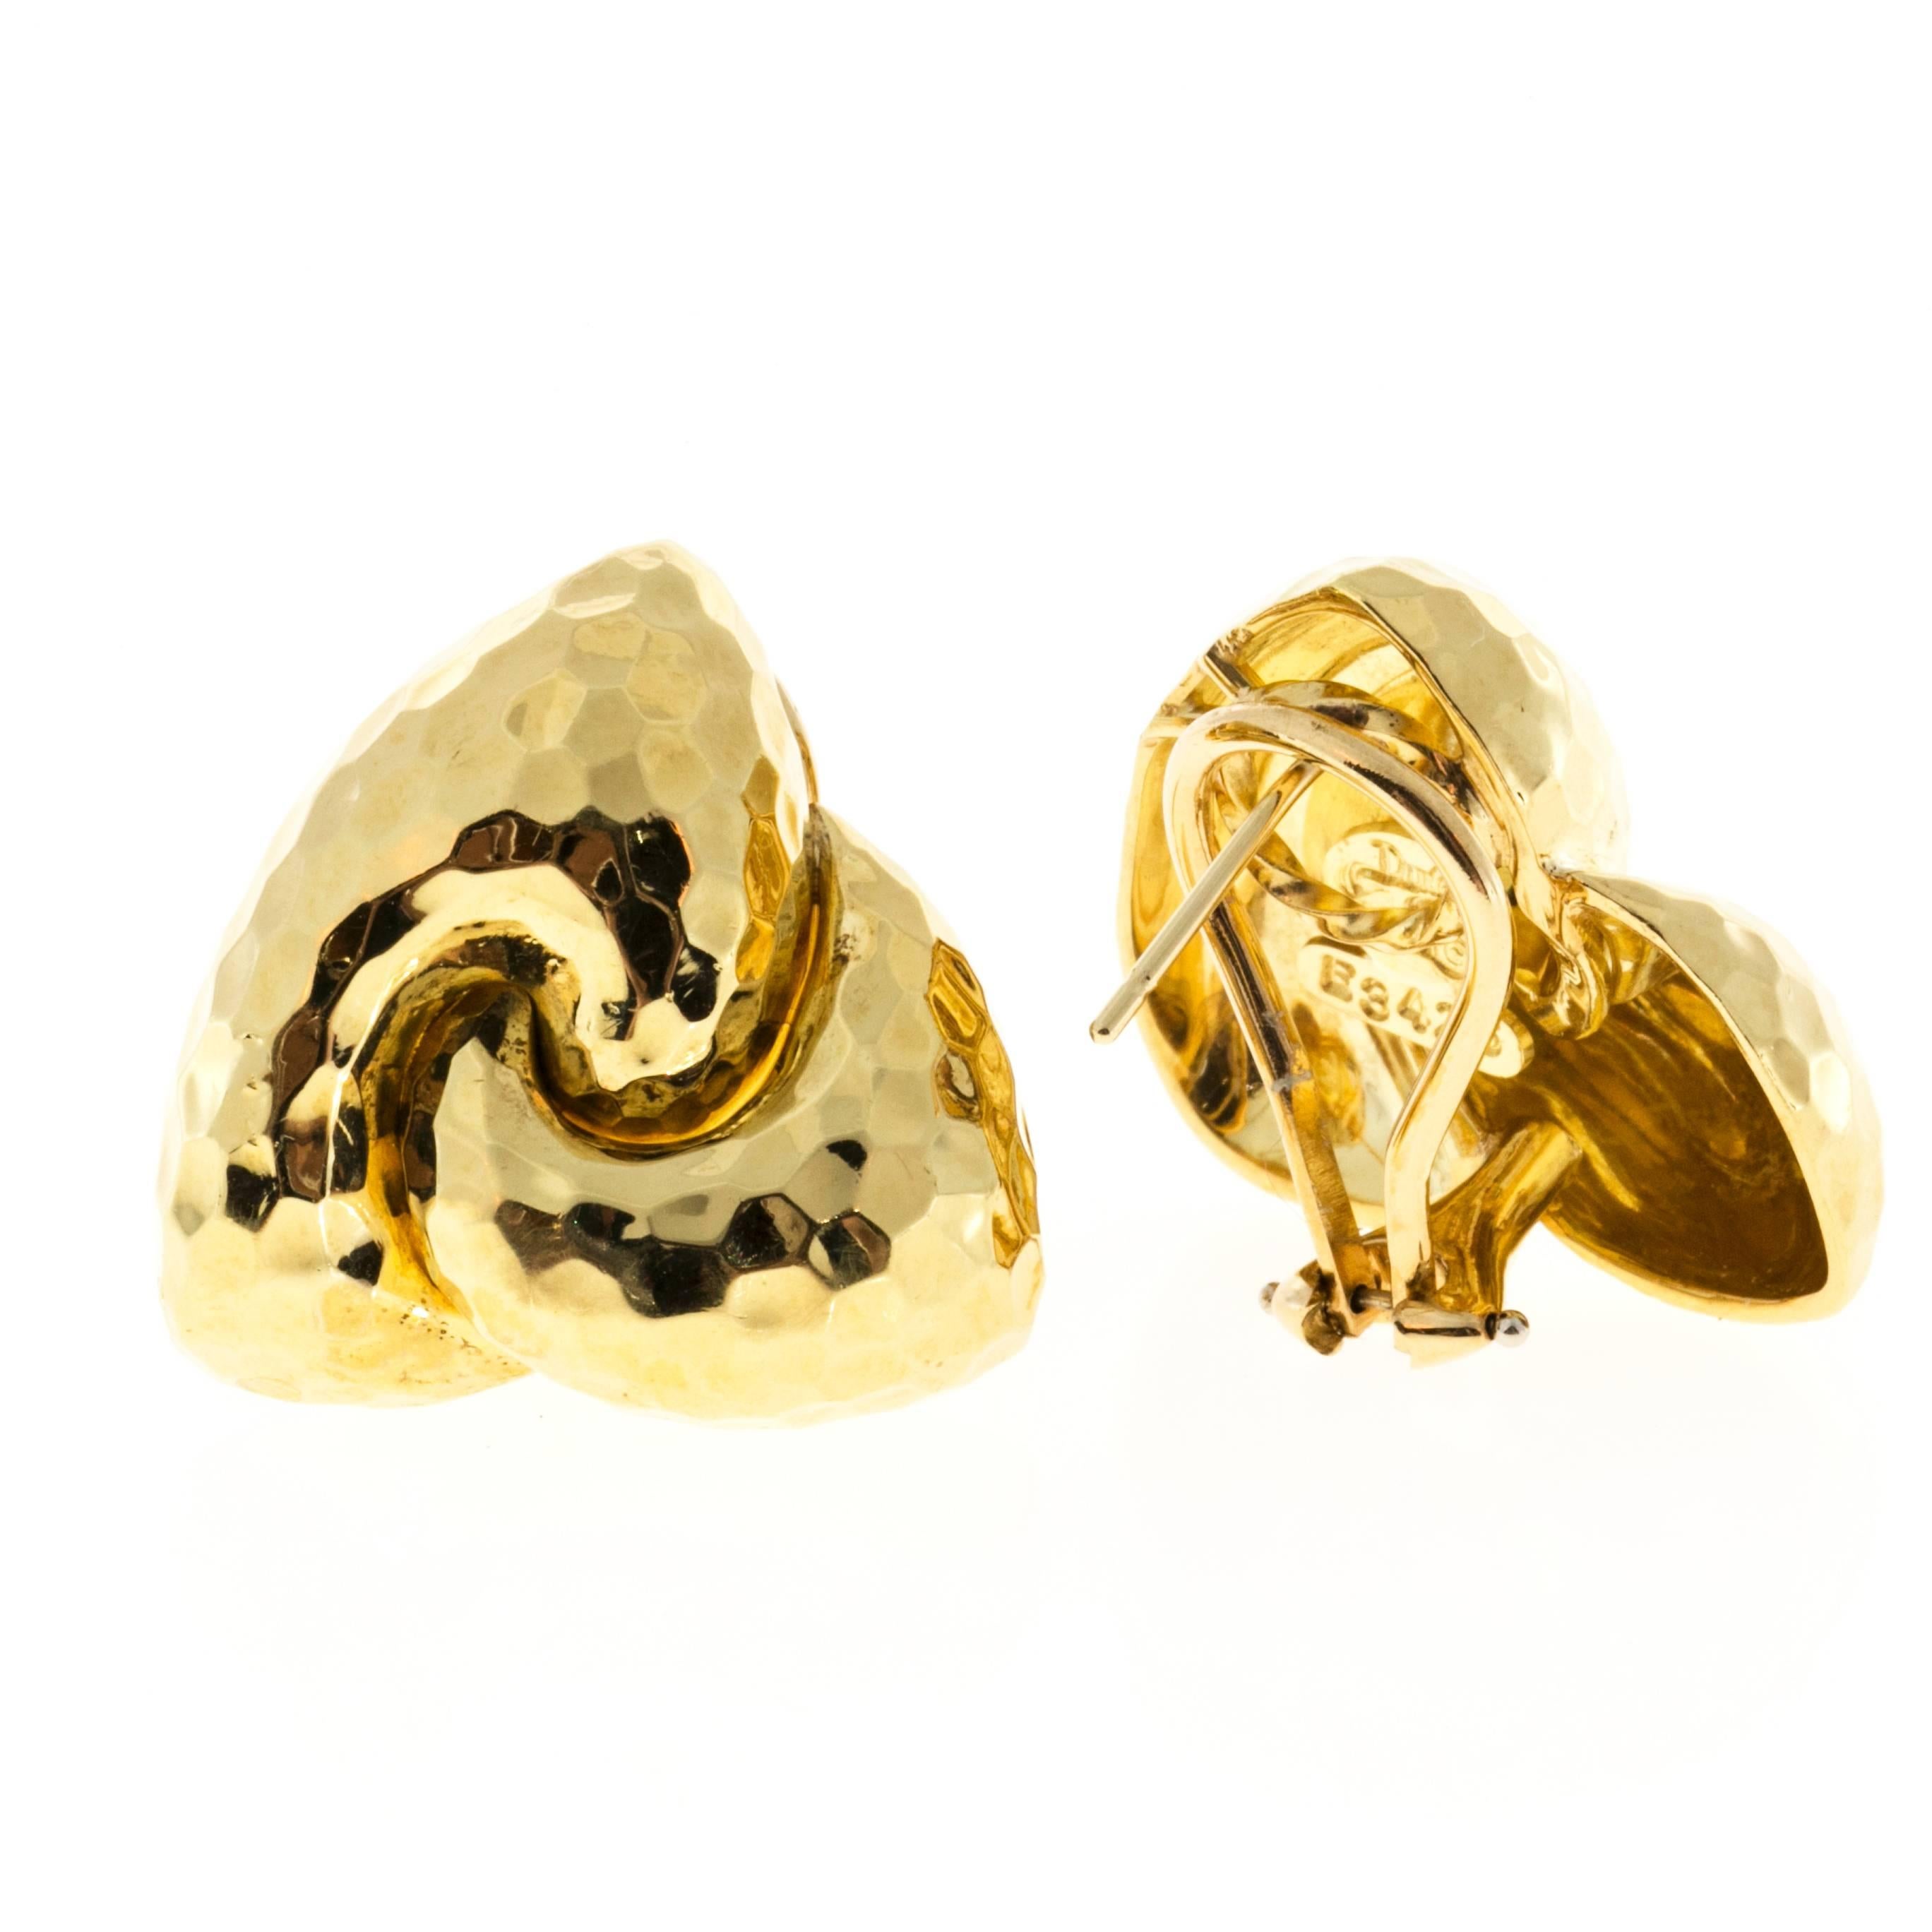 Henry Dunay hammered 18k yellow gold clip post earrings.

18k Yellow Gold
Stamped: 750 D E3426 D=Dunay
20.6 grams
7/8 x 7/8 inch